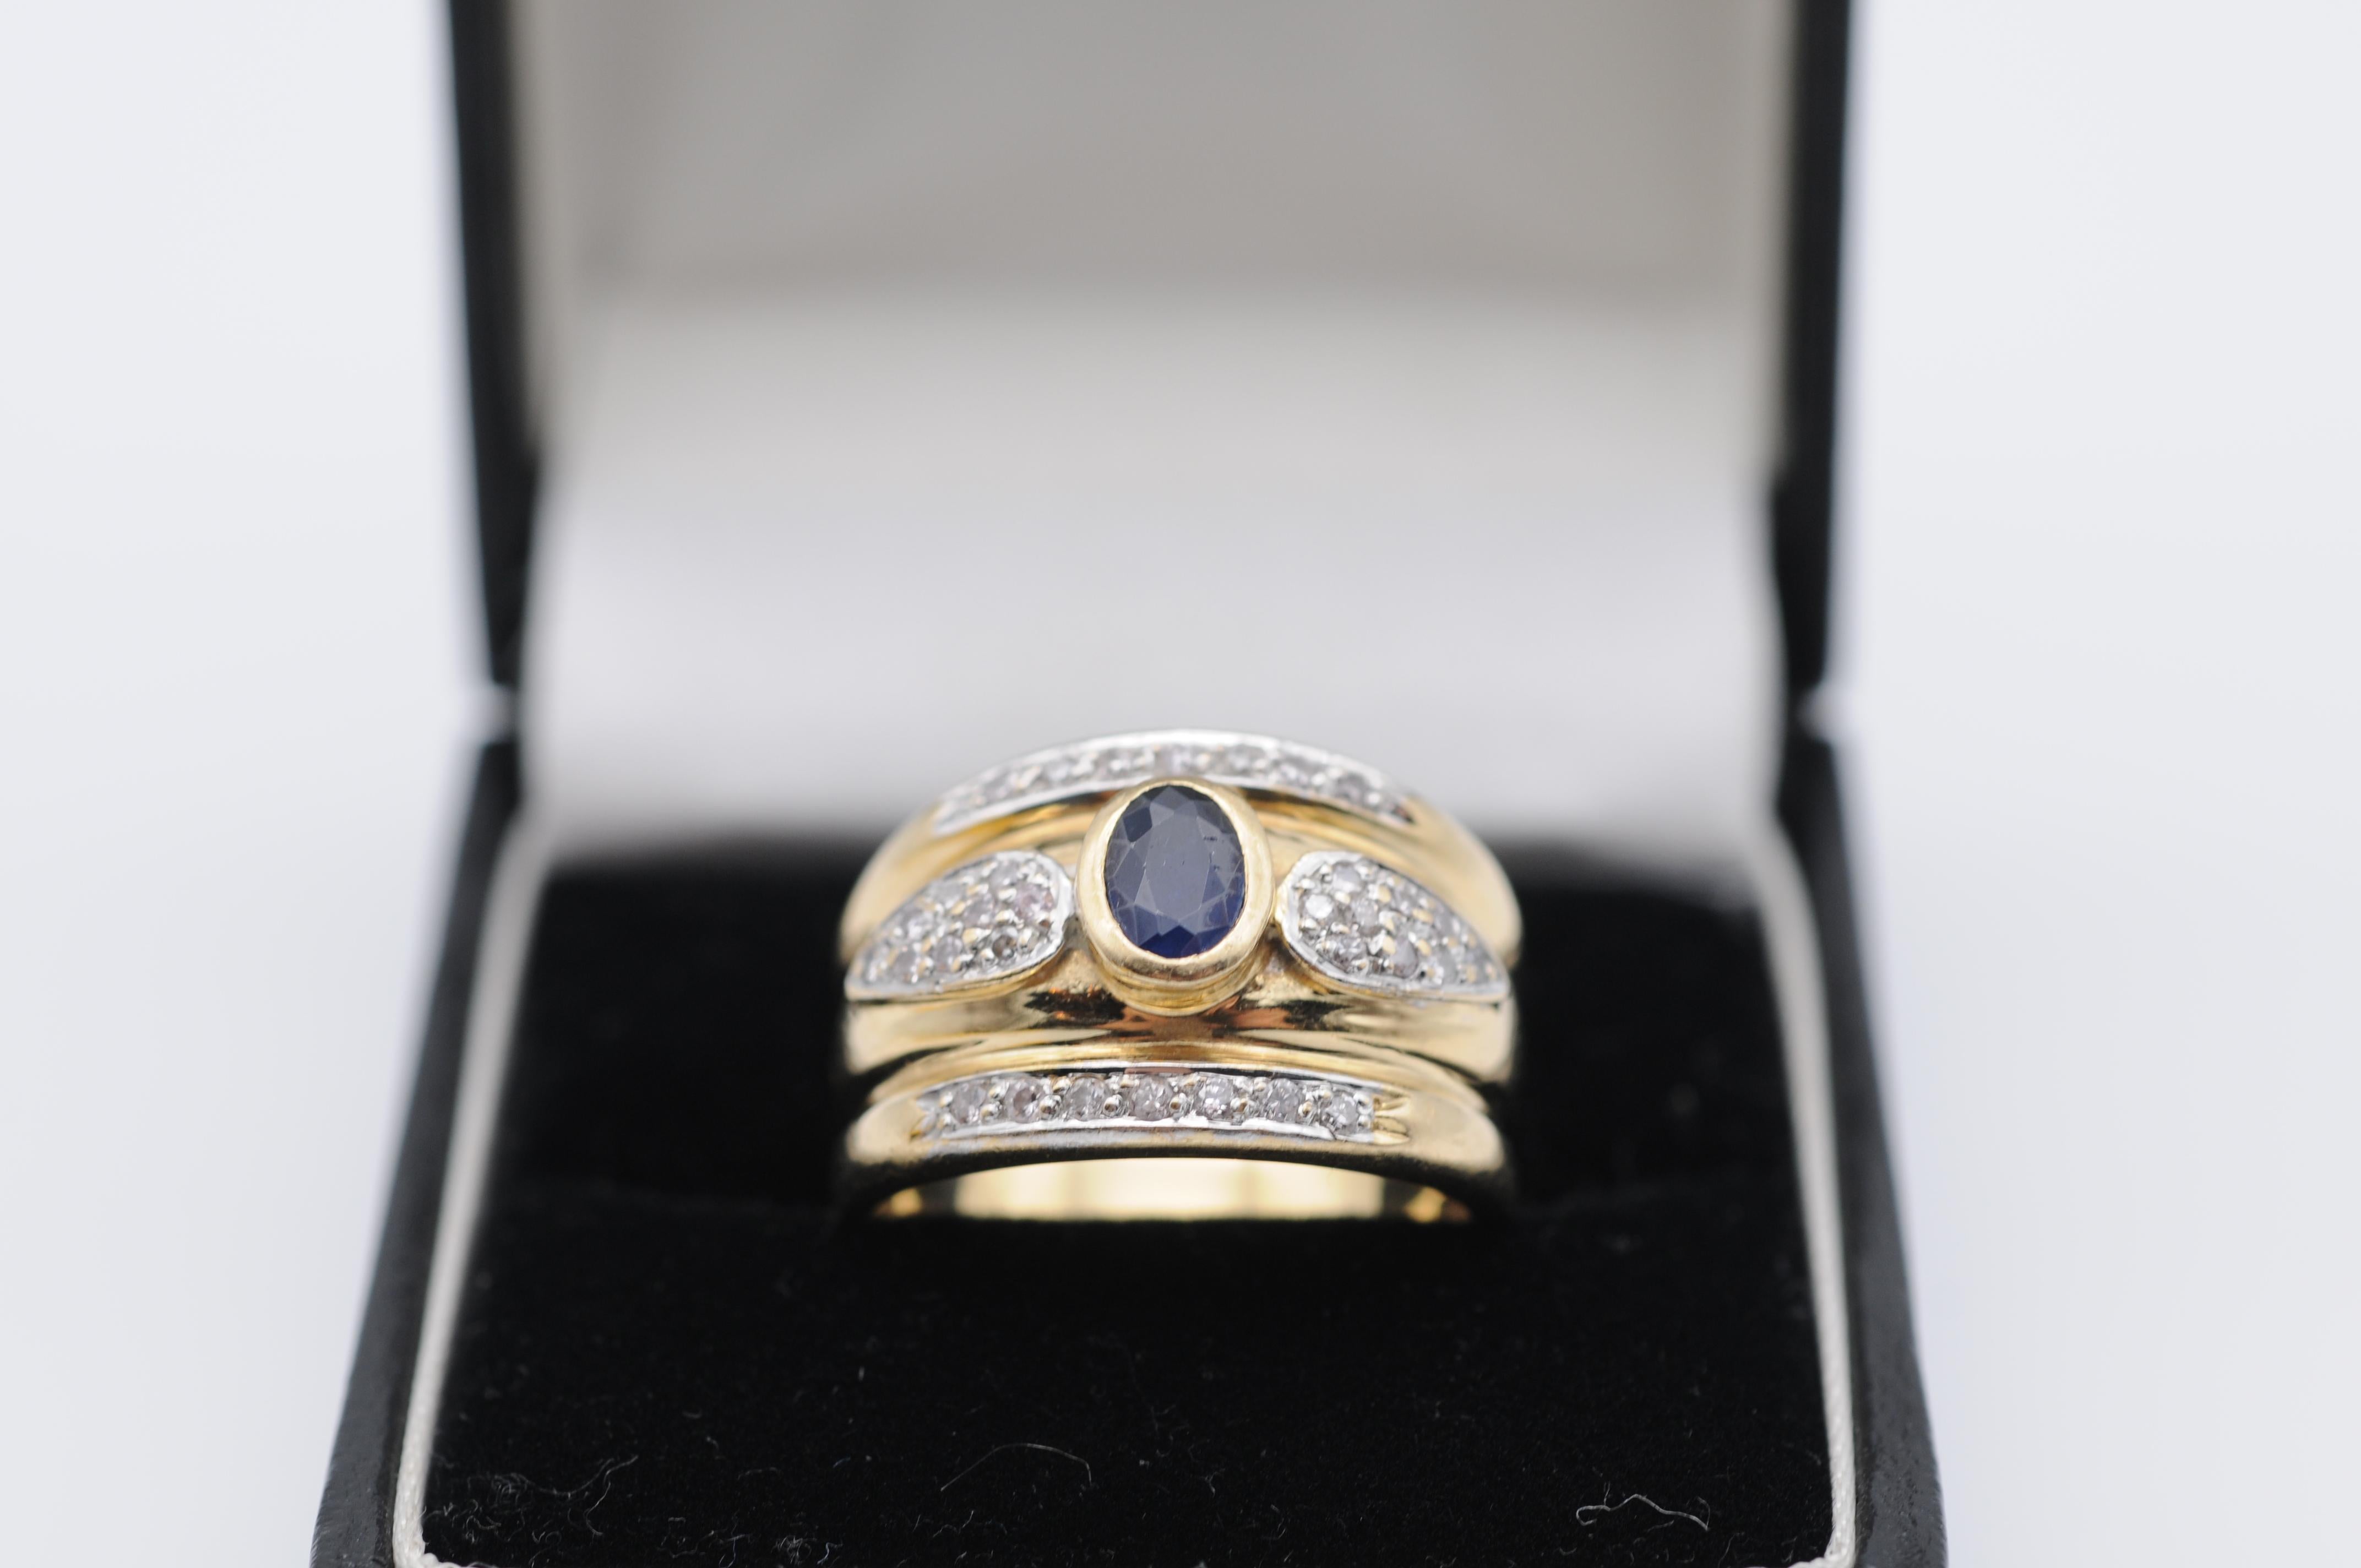 Indulge in the captivating allure of this exquisite 14k yellow gold ring, a true masterpiece of design and craftsmanship. At its center lies a mesmerizing dark blue sapphire, carefully cut into an exquisite oval shape that radiates a sense of